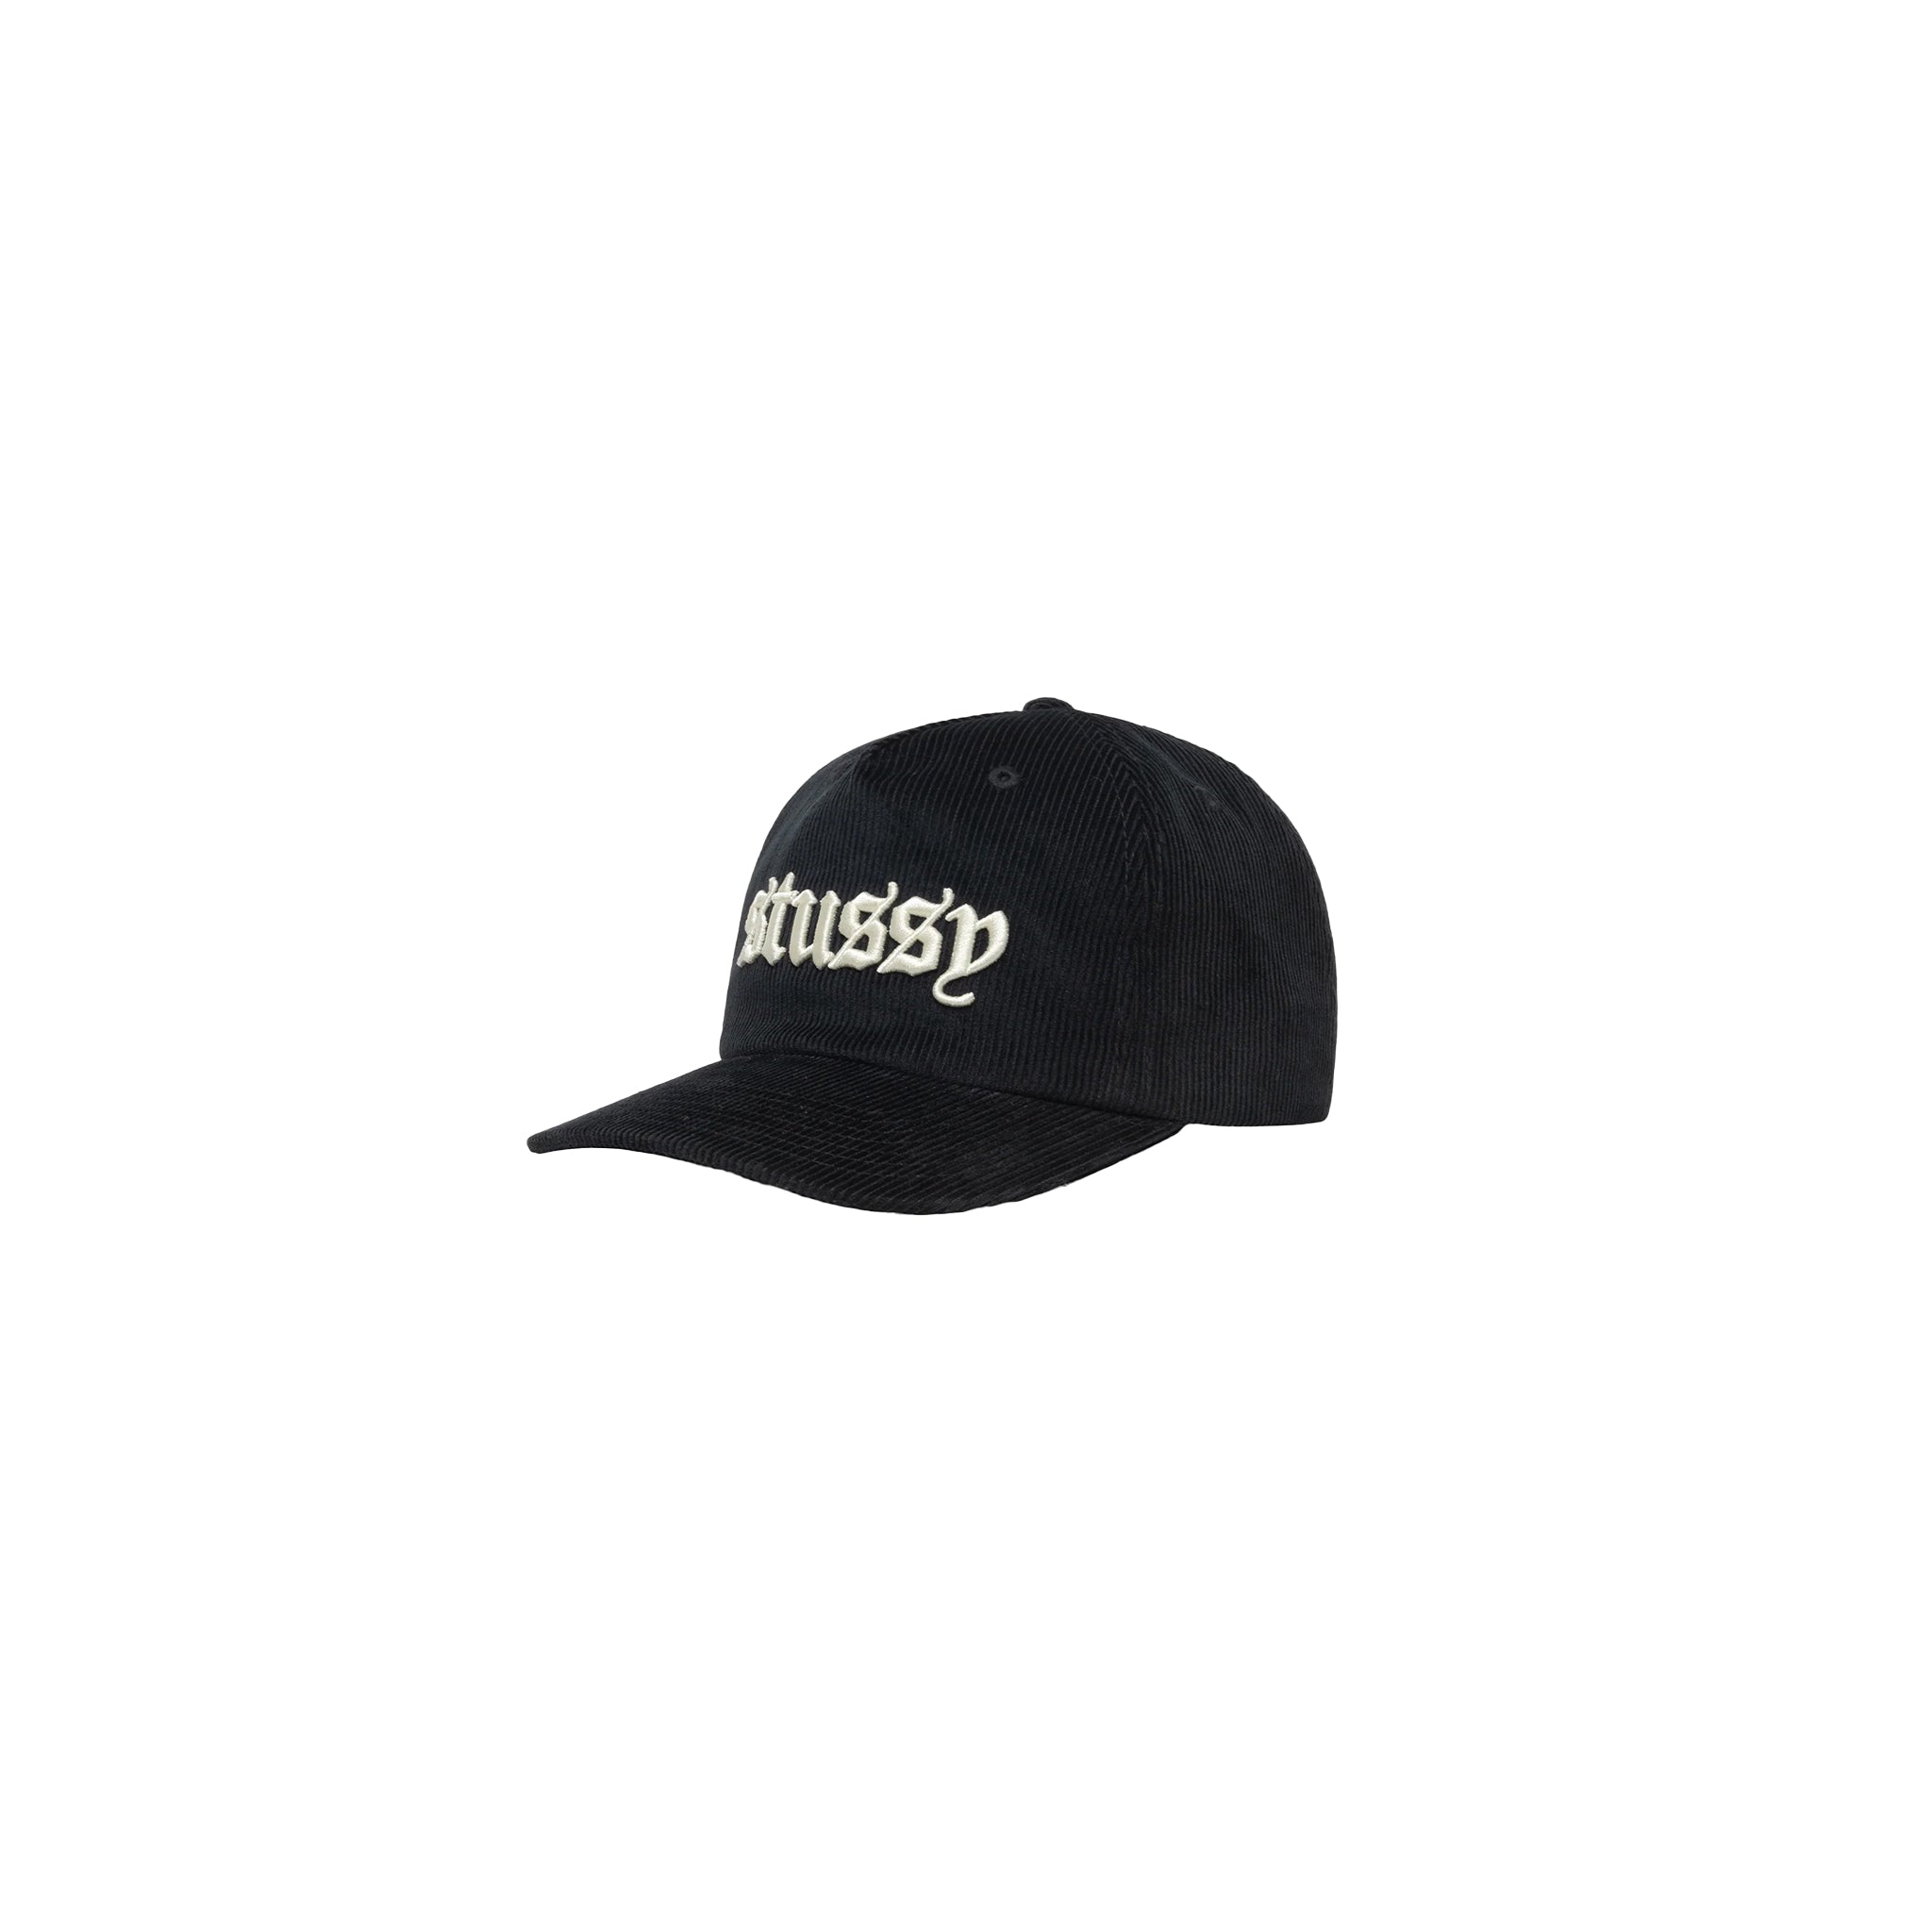 Stussy Mid-Depth Old English Snapback Black – Story Cape Town